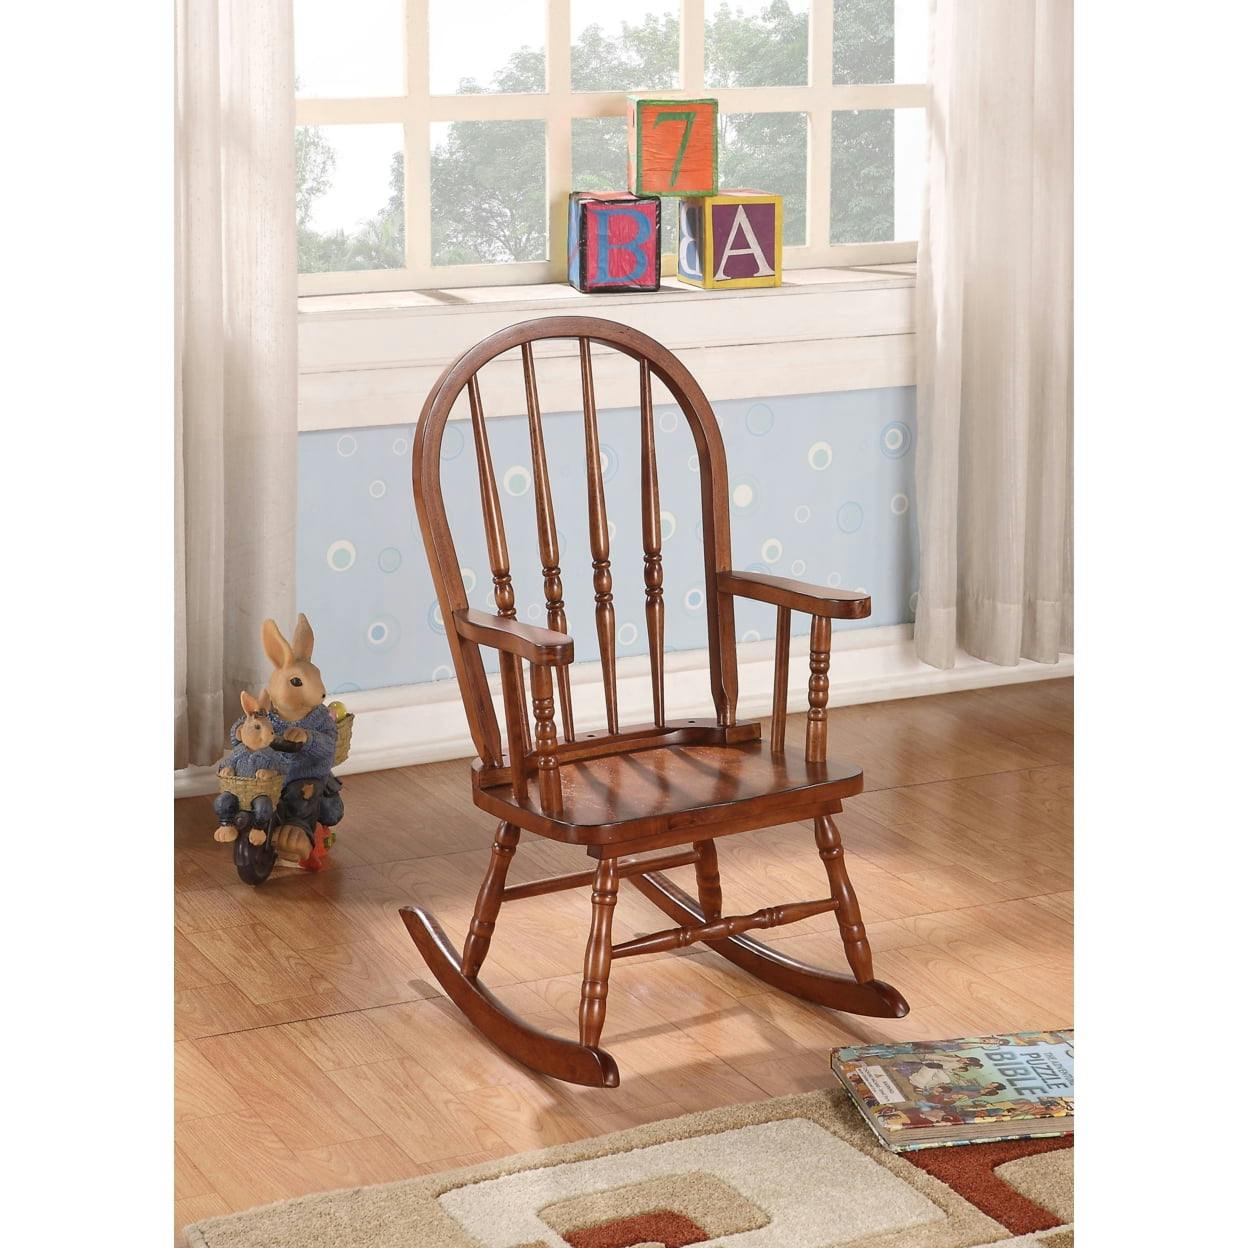 Kloris Tobacco Finish Traditional Youth Rocking Chair